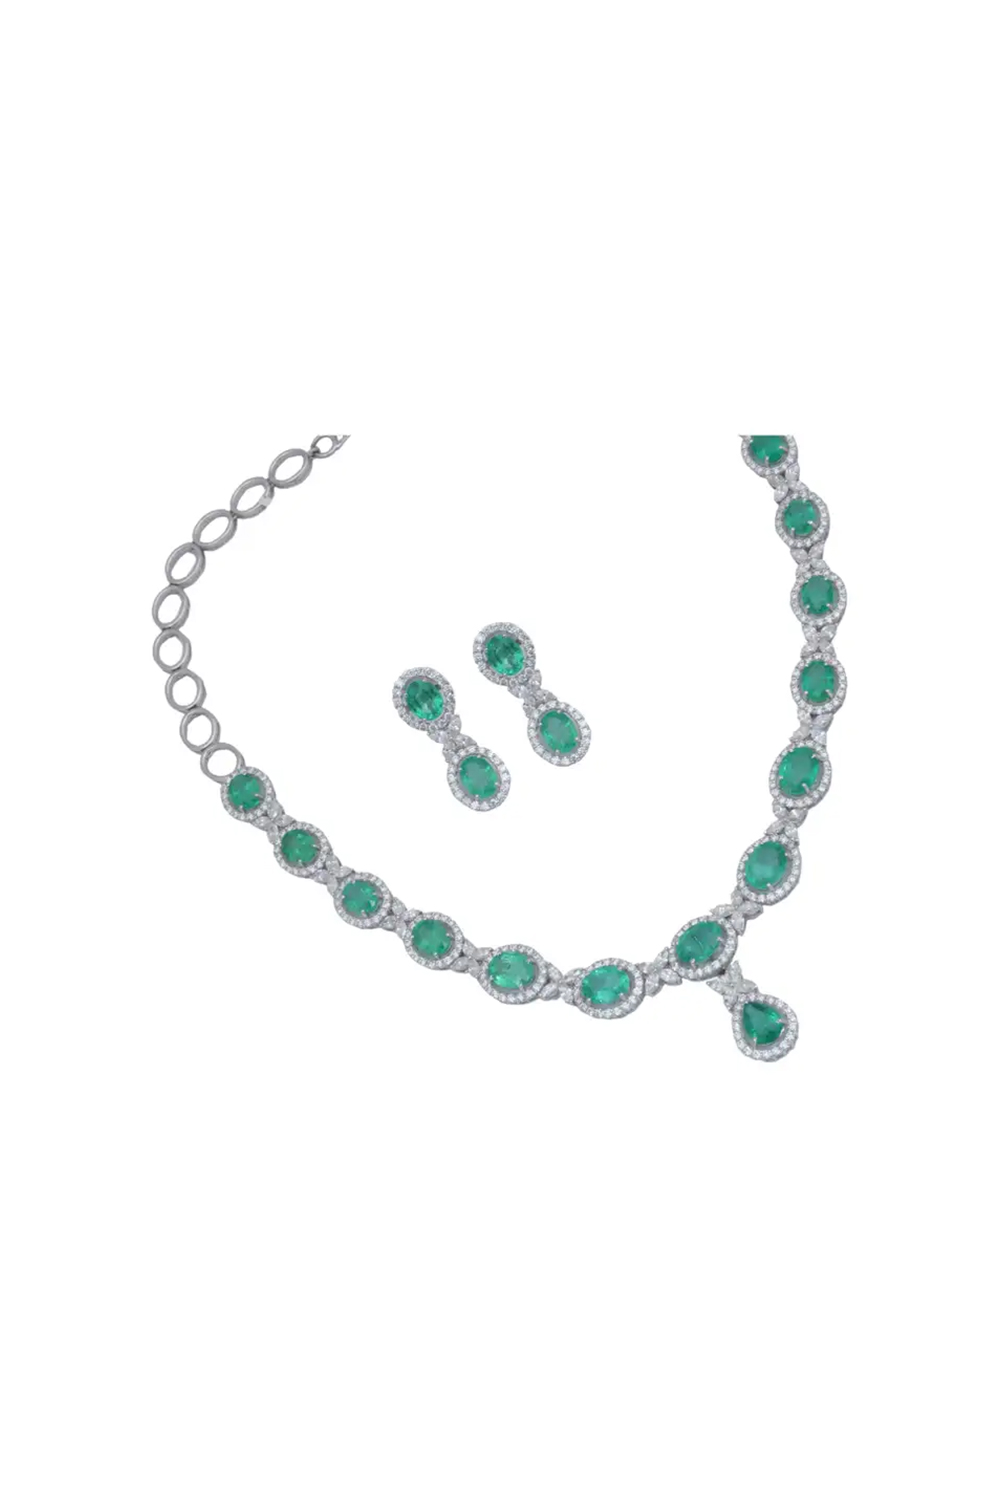 Natural Diamond 11.29 Carats and Zambian Emeralds 28.17 Carats Necklace in 14k Gold